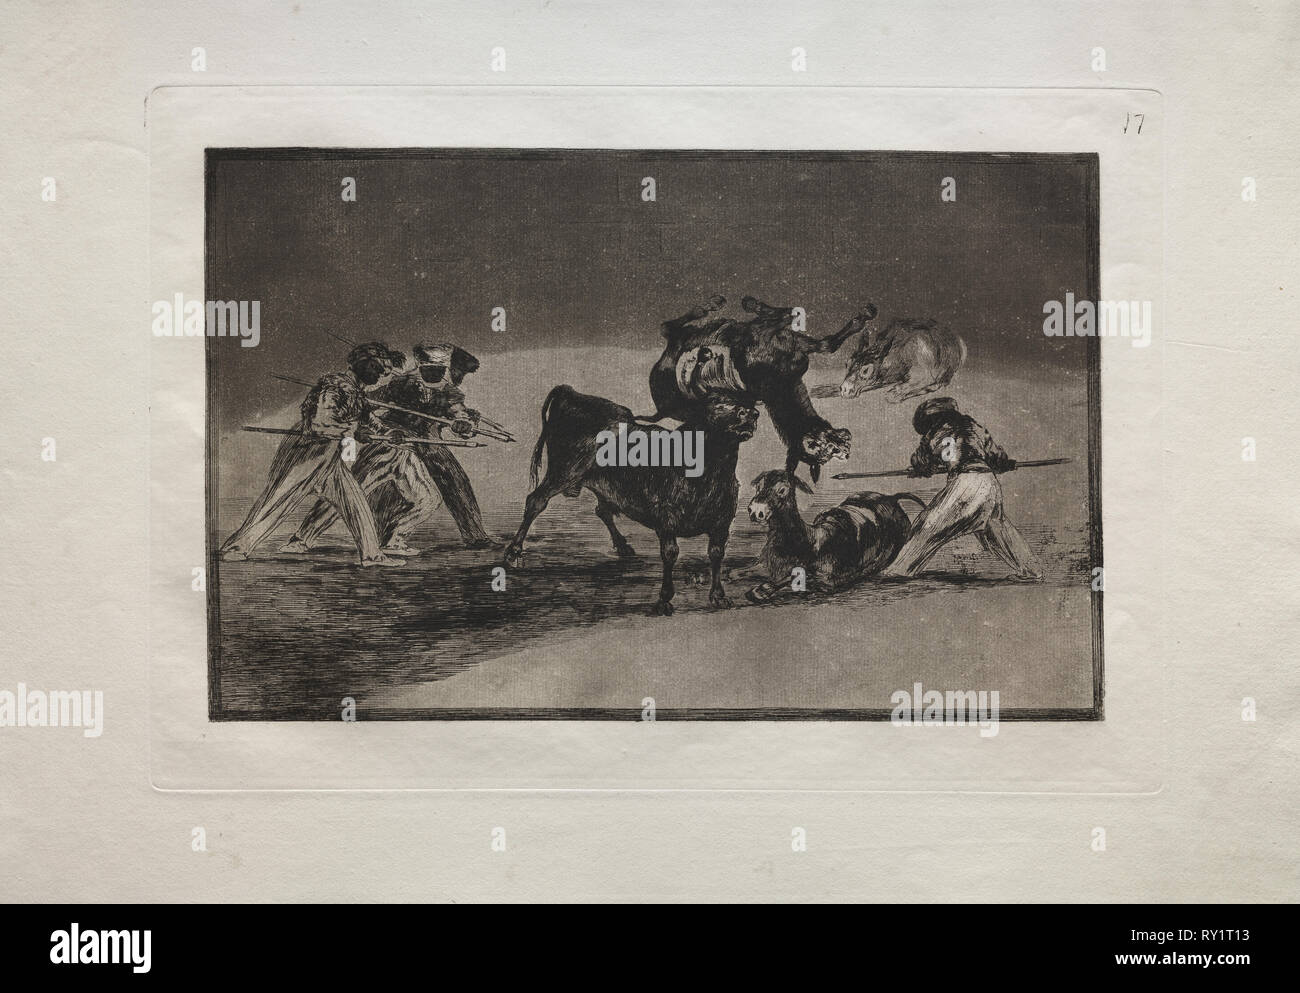 Bullfights:  The Moors Use Donkeys as a Barrier to Defend Themselves Against the Bull Whose Horns Have Been Tipped with Balls, 1876. Francisco de Goya (Spanish, 1746-1828). Engraving Stock Photo